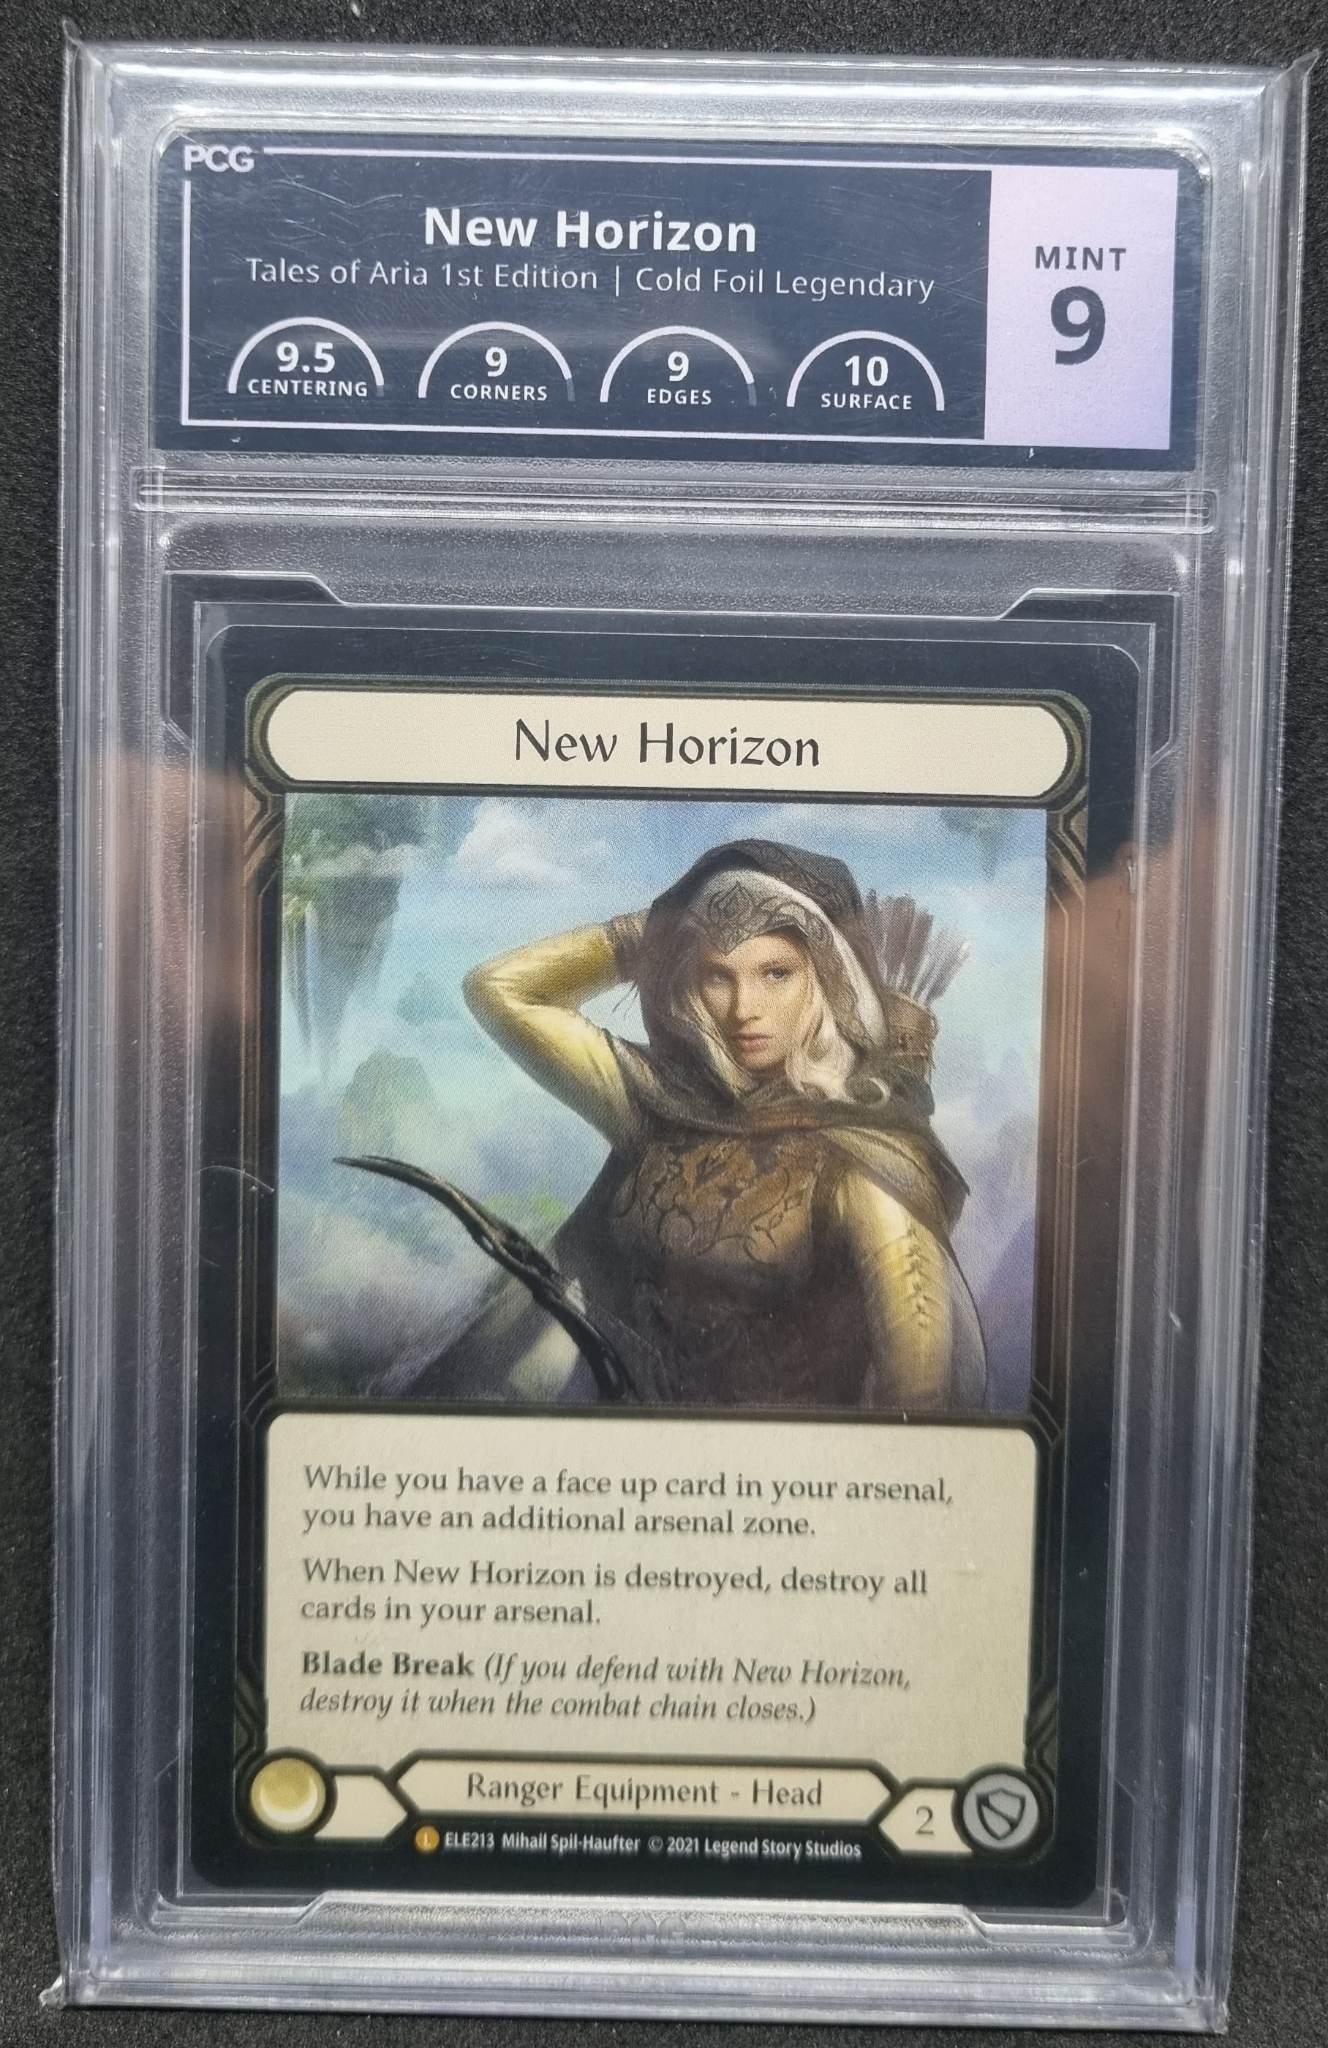 PCG 9 (000026526) - New Horizon [ELE213] (Tales of Aria) 1st Edition Cold  Foil